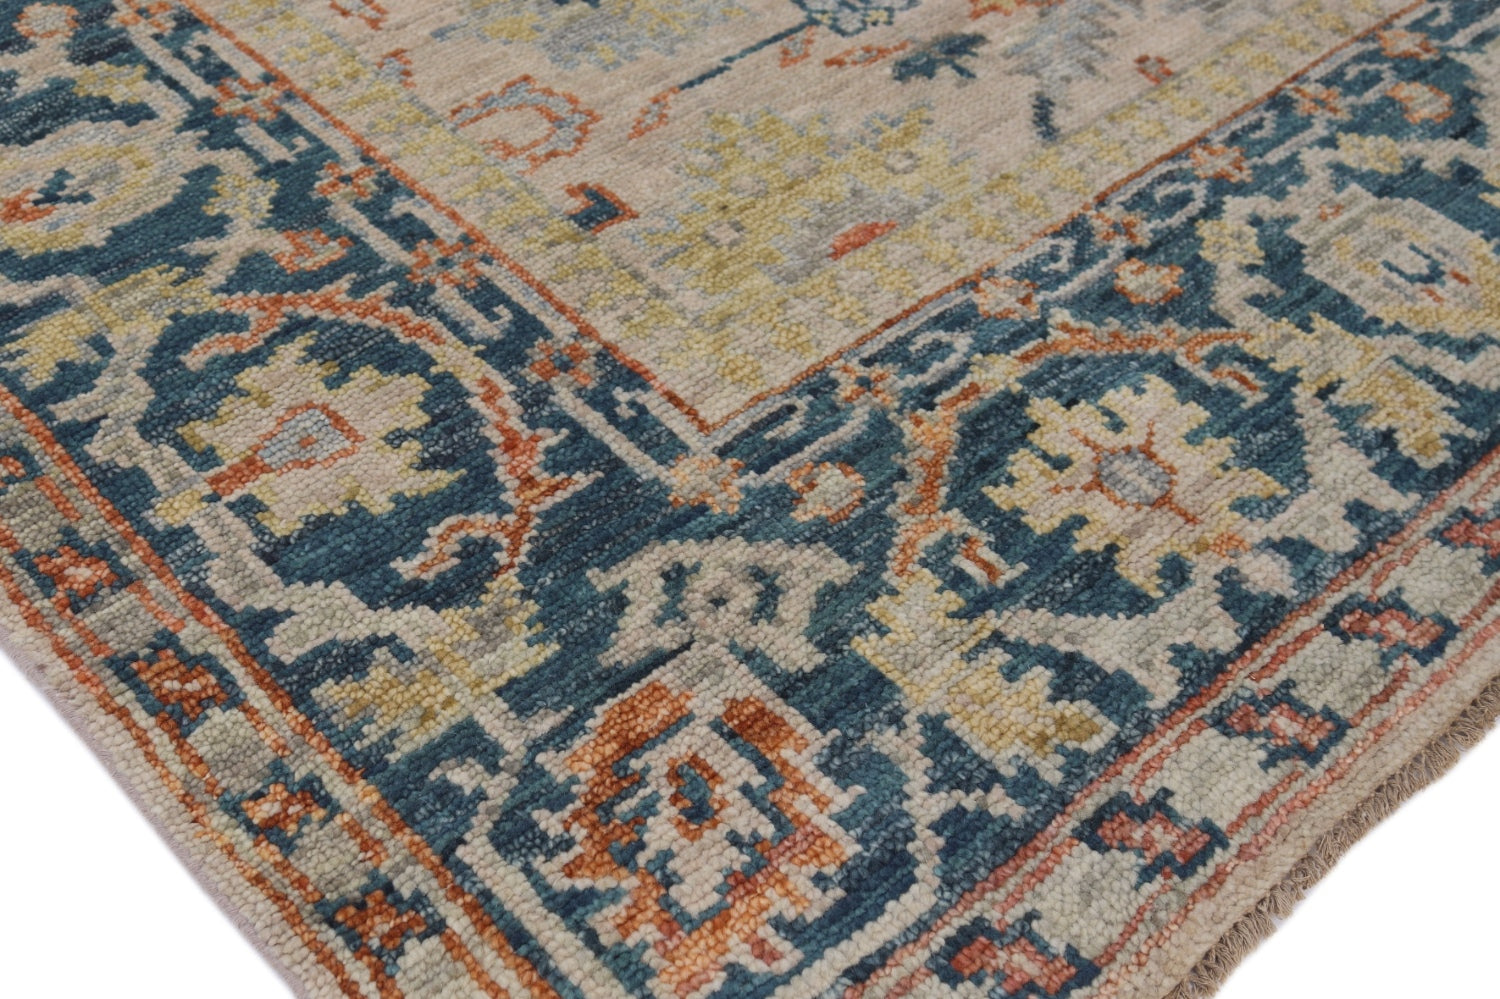 Sultanabad 6 Handwoven Traditional Rug, J71676